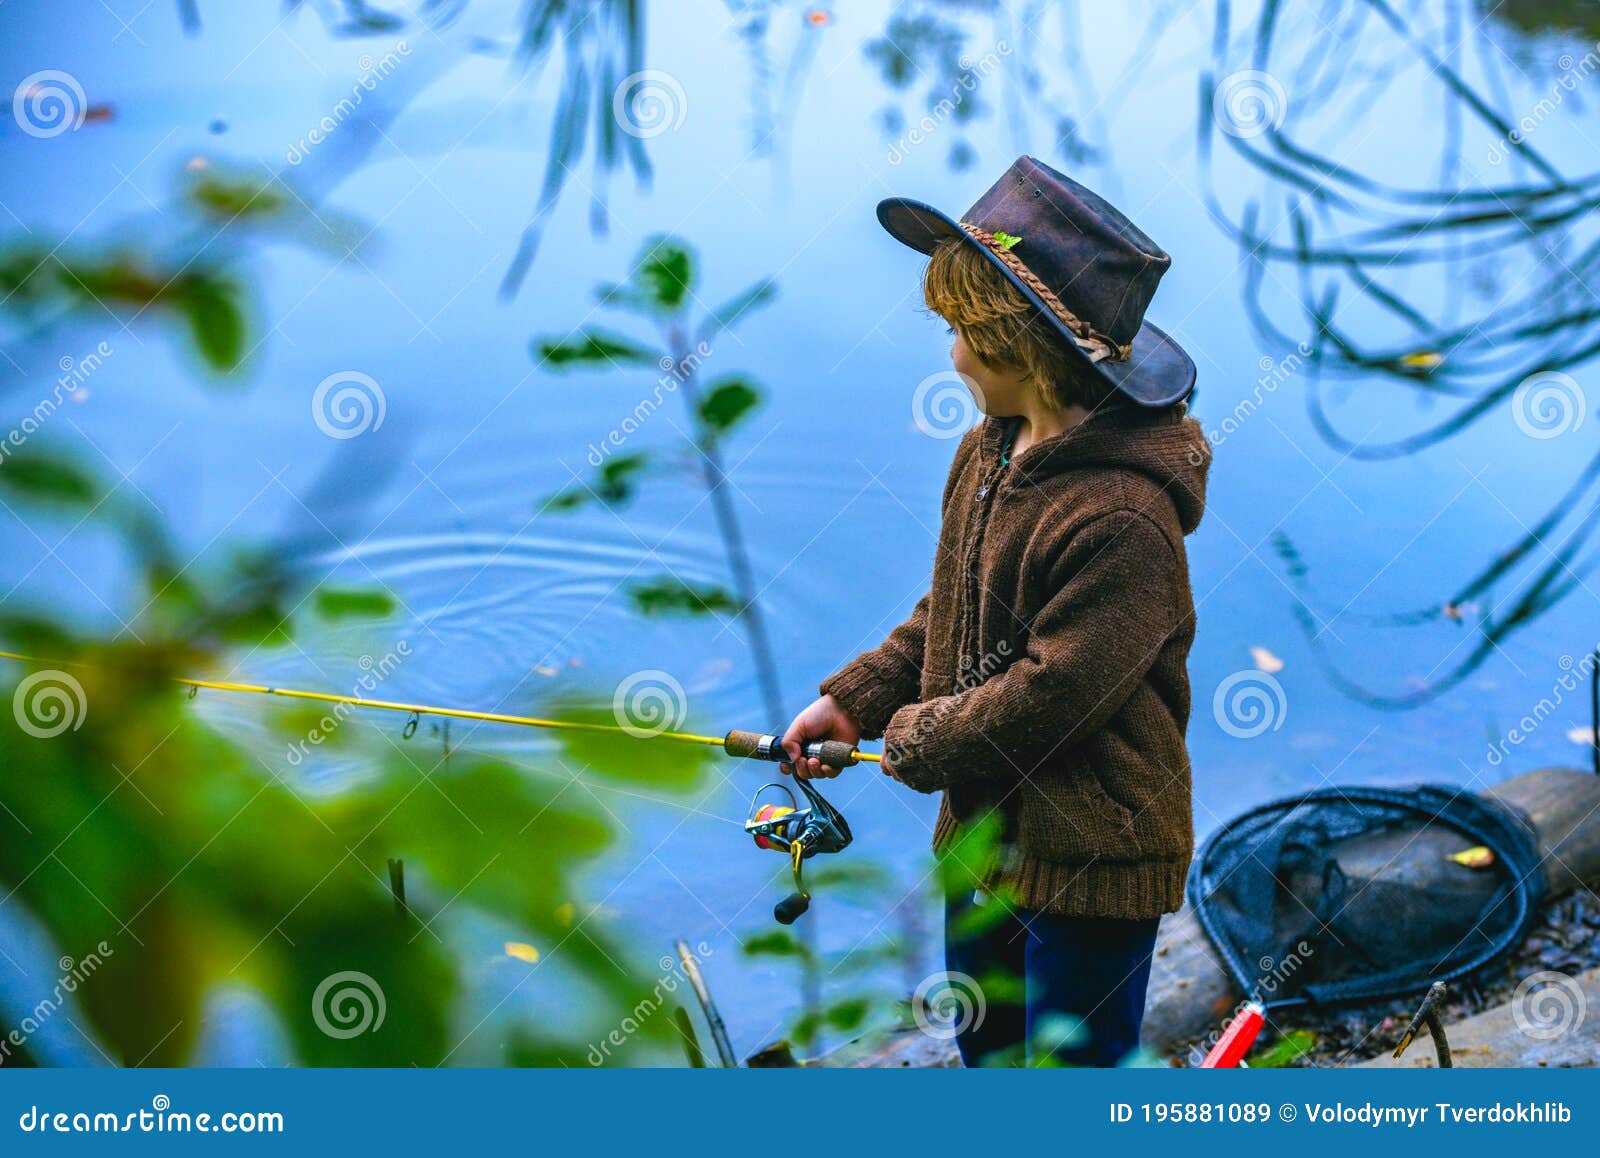 https://thumbs.dreamstime.com/z/little-boy-fishing-overalls-dock-lake-pond-child-rod-standing-water-young-fisherman-trip-back-view-195881089.jpg